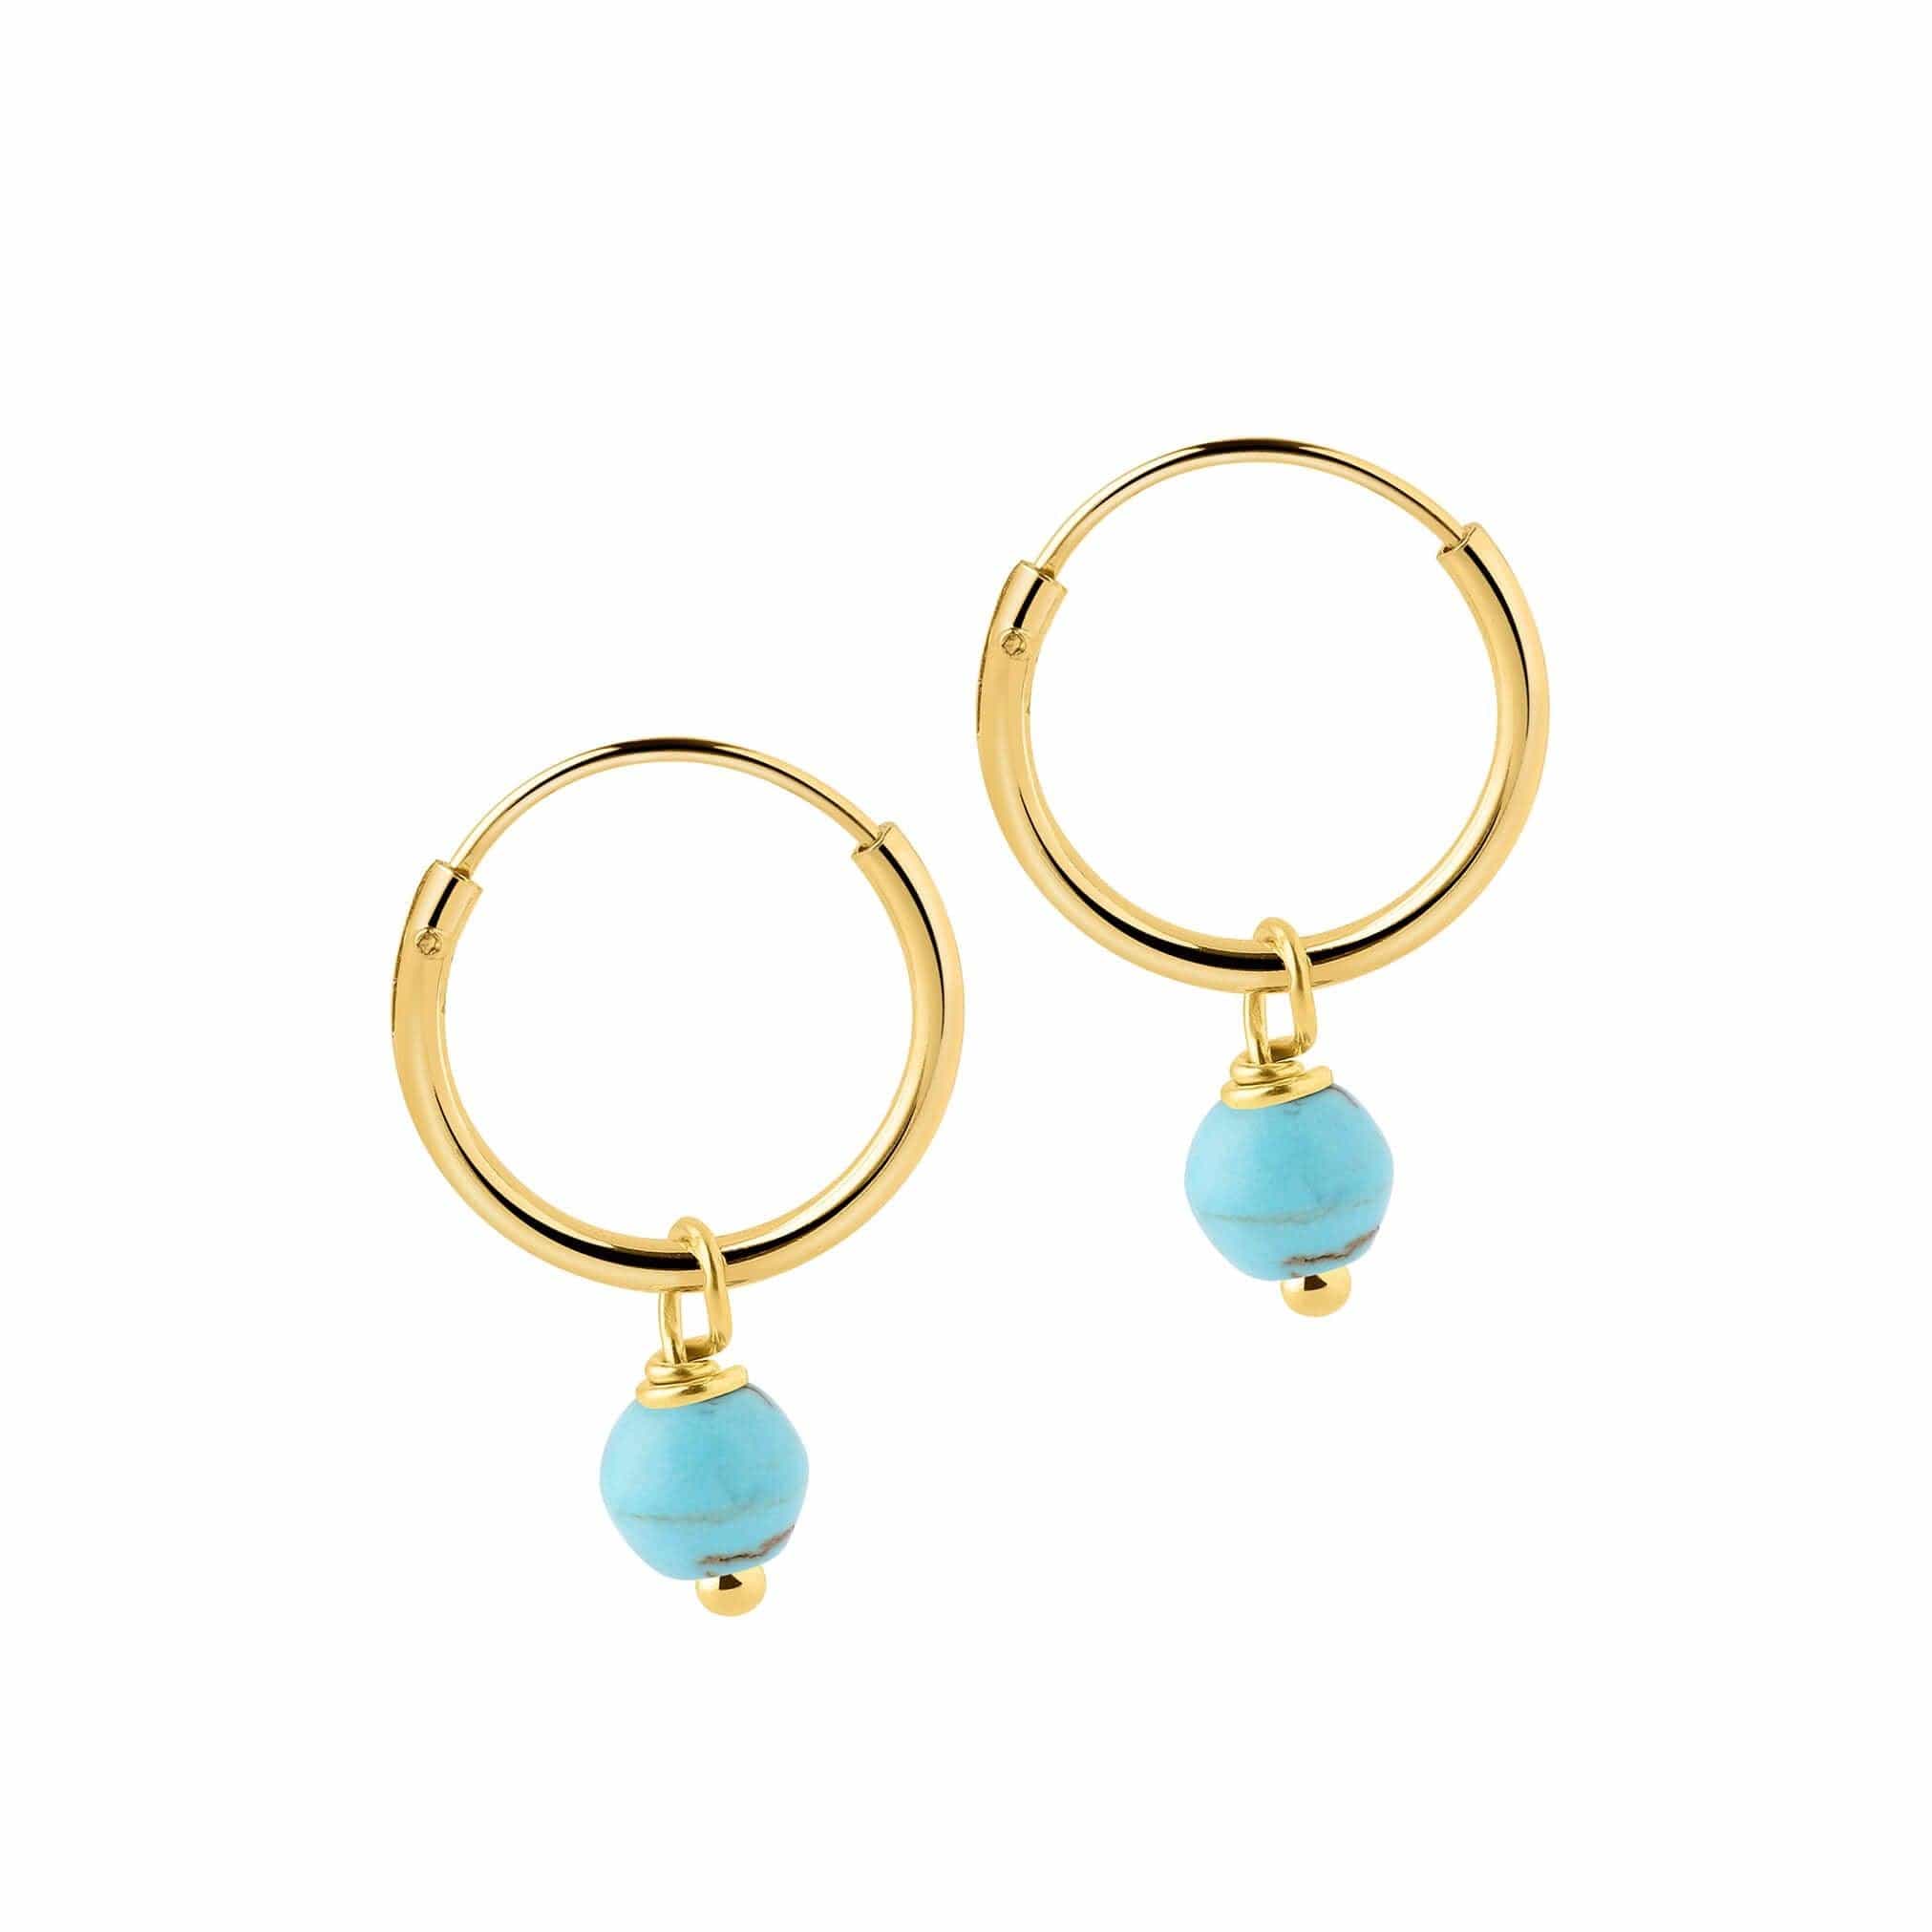 12 mm gold plated Hoop Earrings with Turquoise Blue Stone